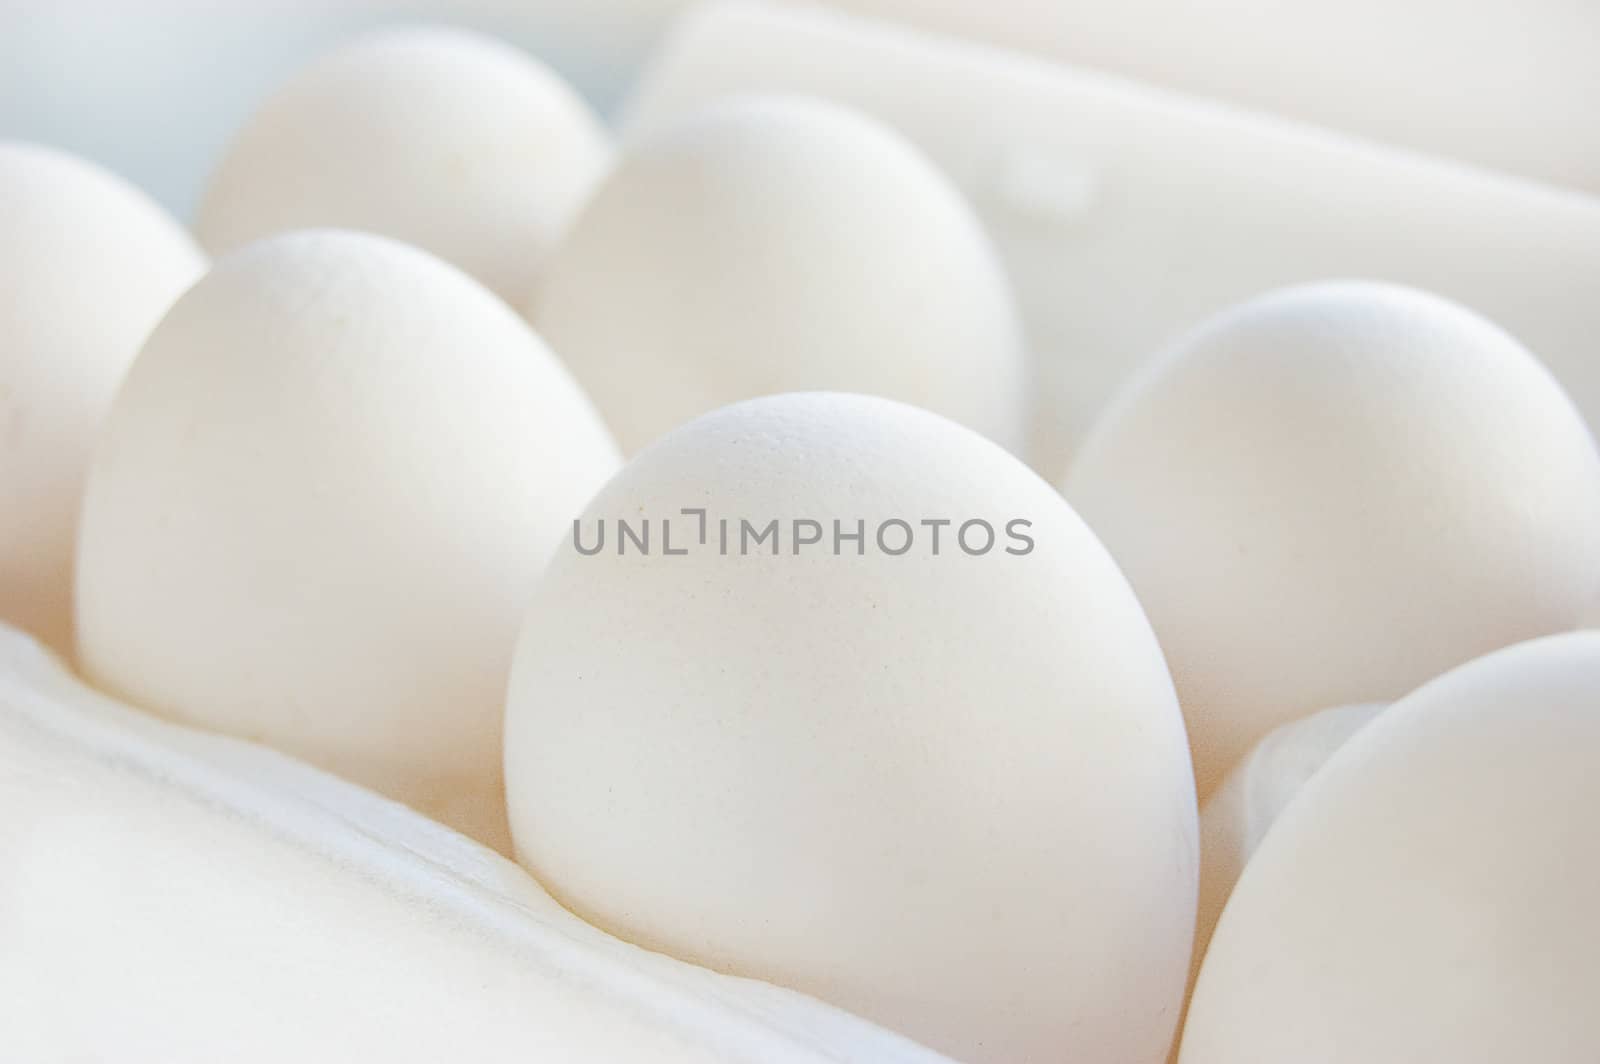 Some white eggs in packing